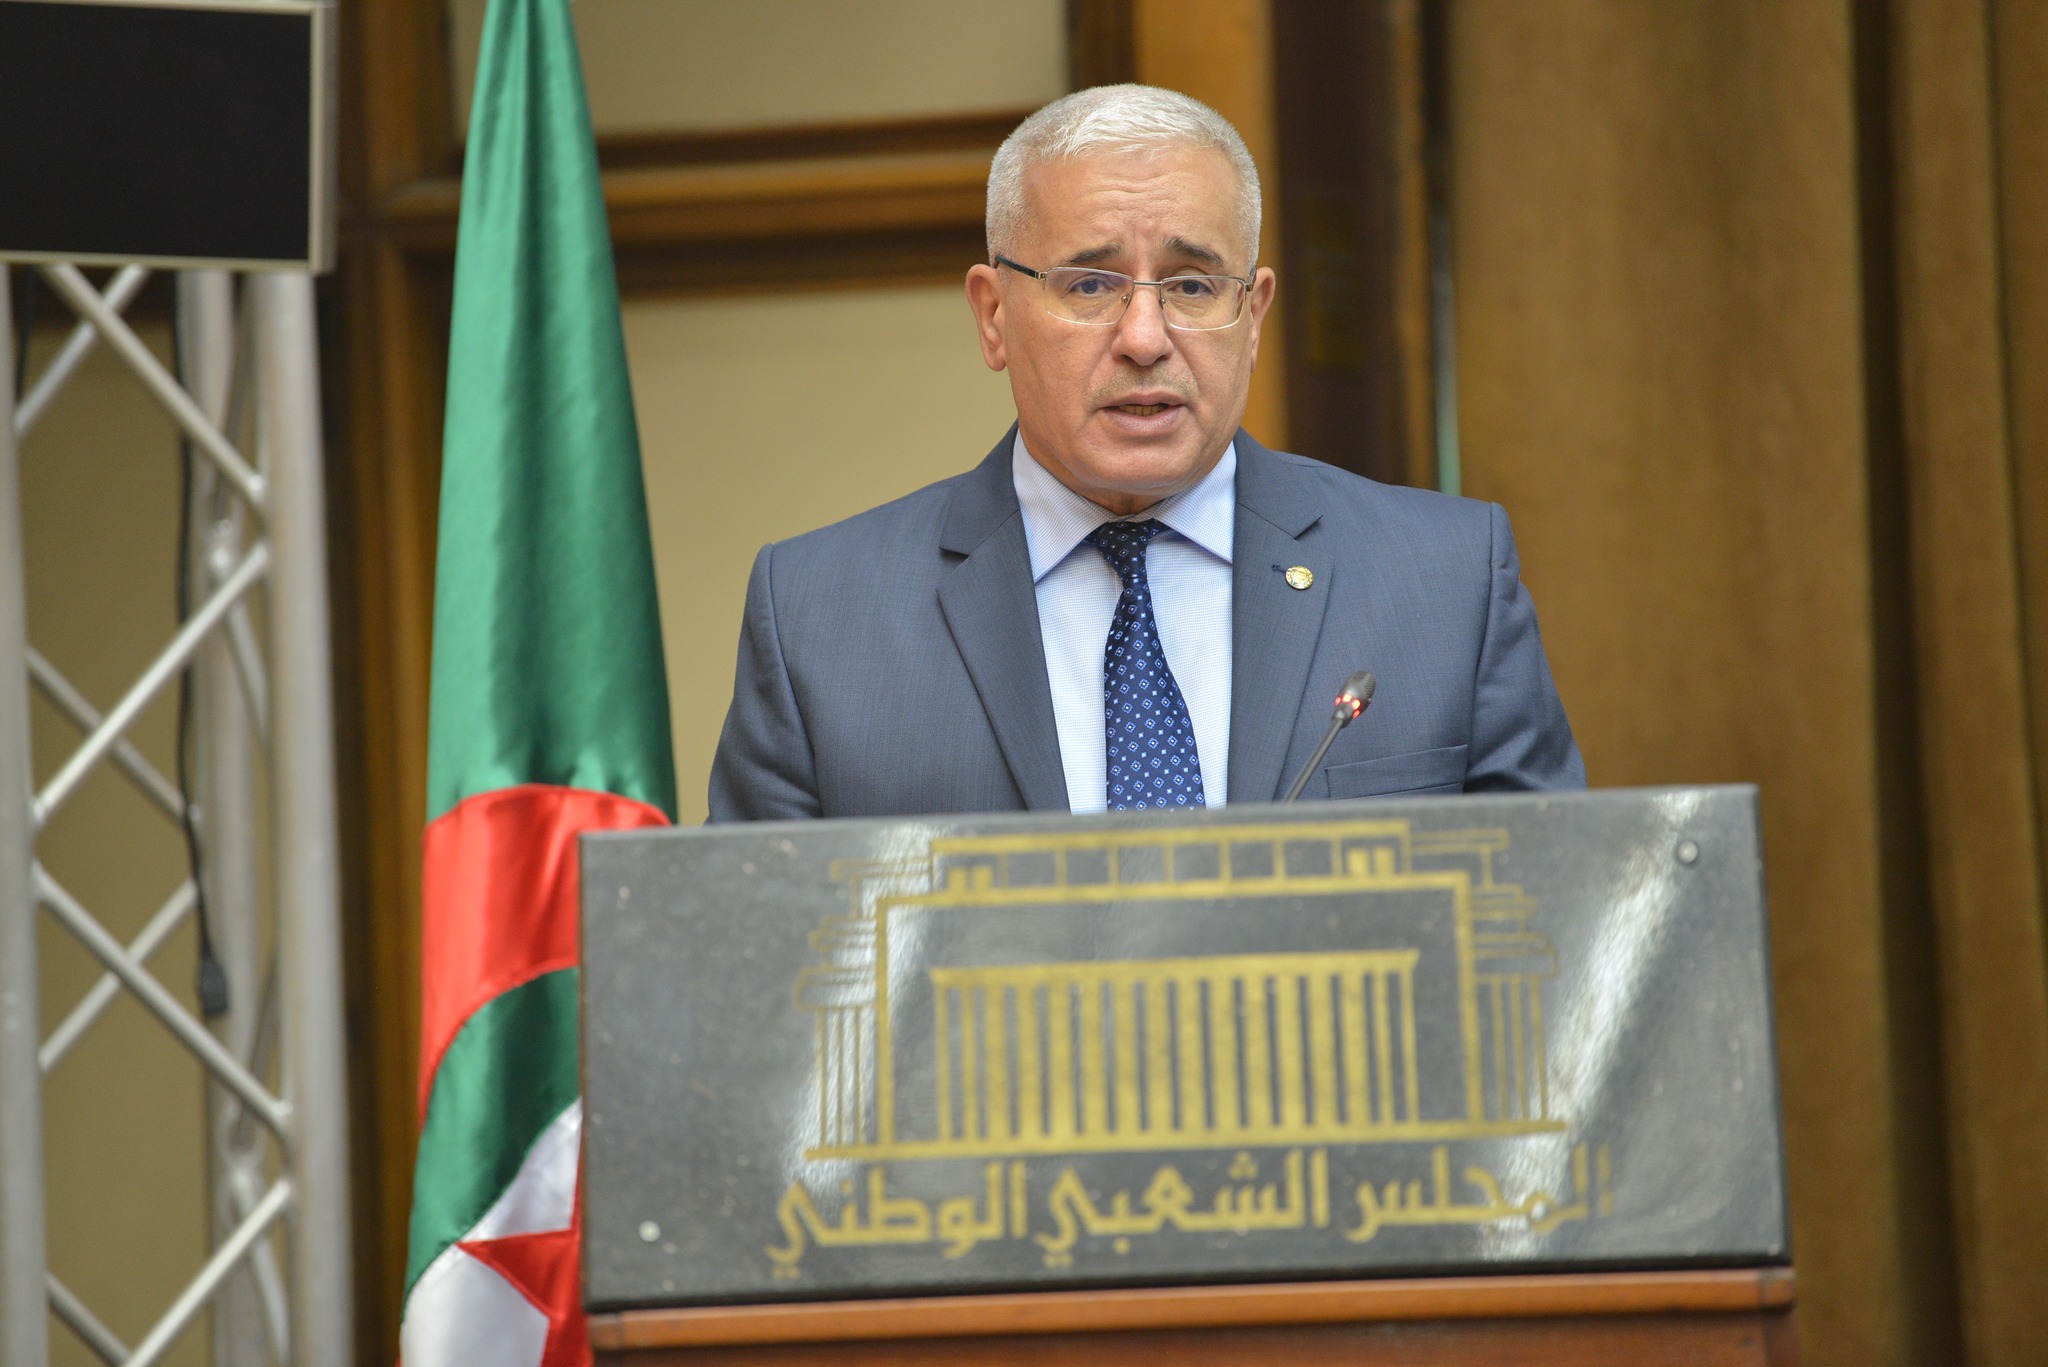 Bougali notes the results of the training session for the representatives of the Sahrawi National Council - Al-Hiwar Algeria